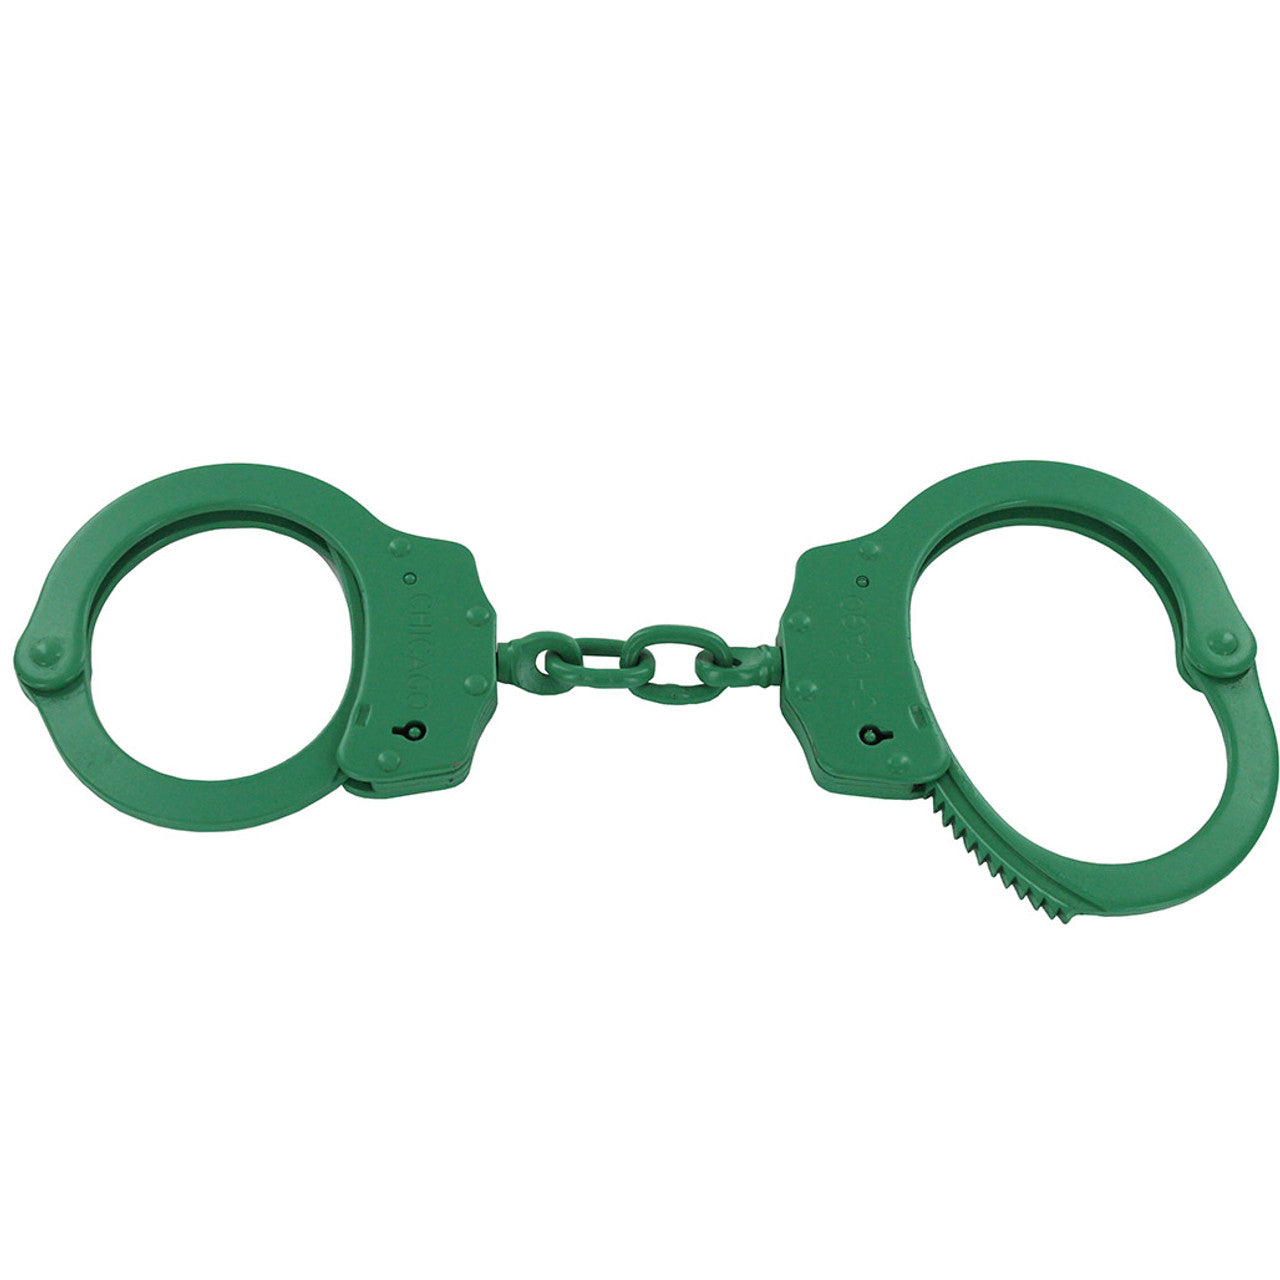 Chicago Double-Locking Handcuffs in Green